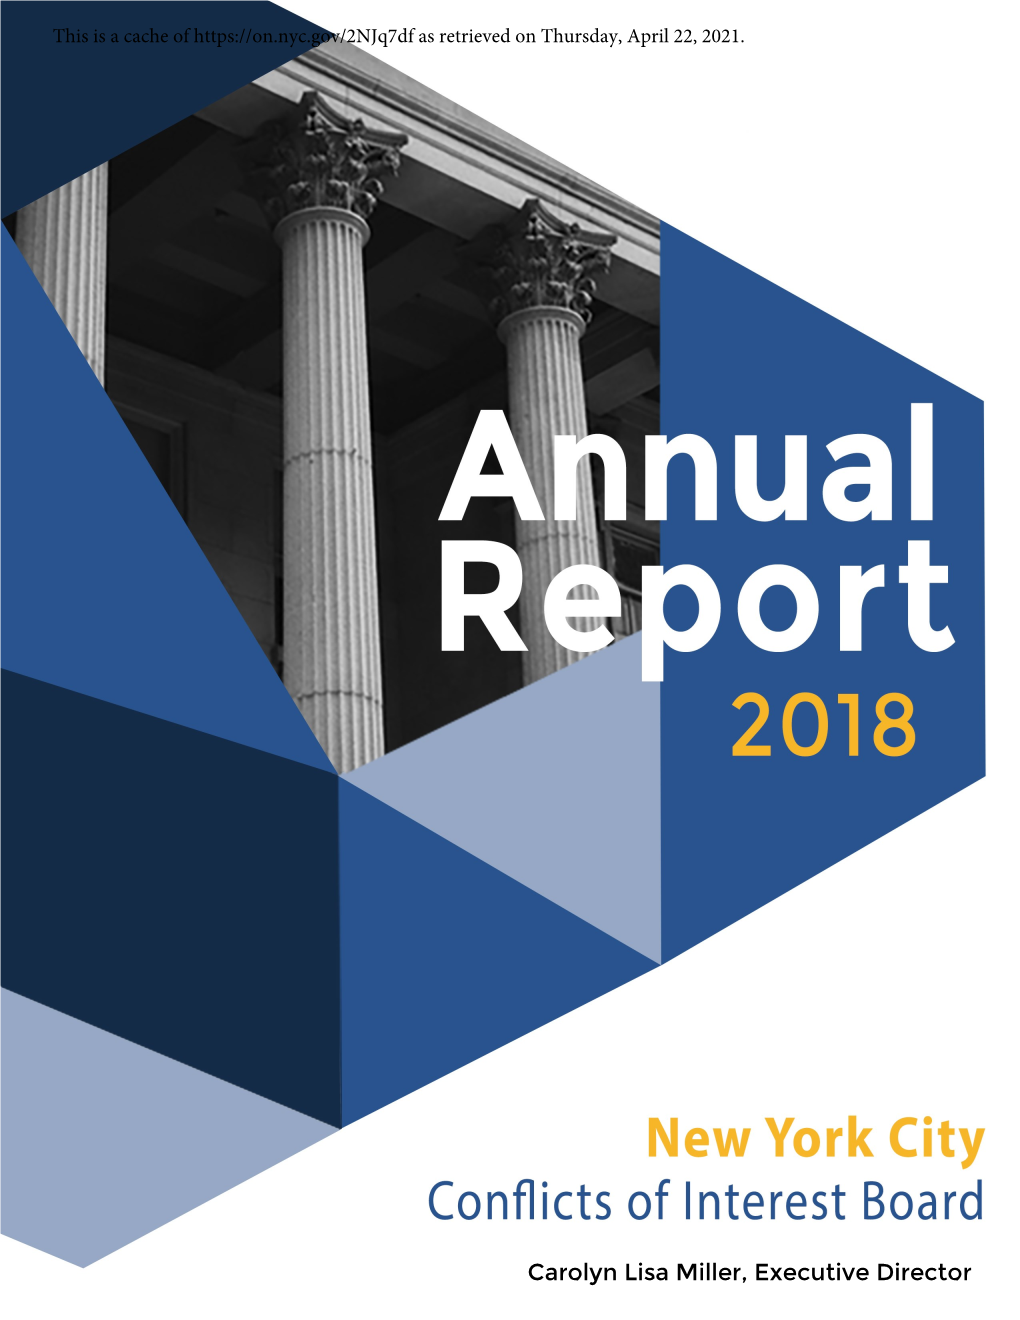 The New York City Conflicts of Interest Board 2018 Annual Report